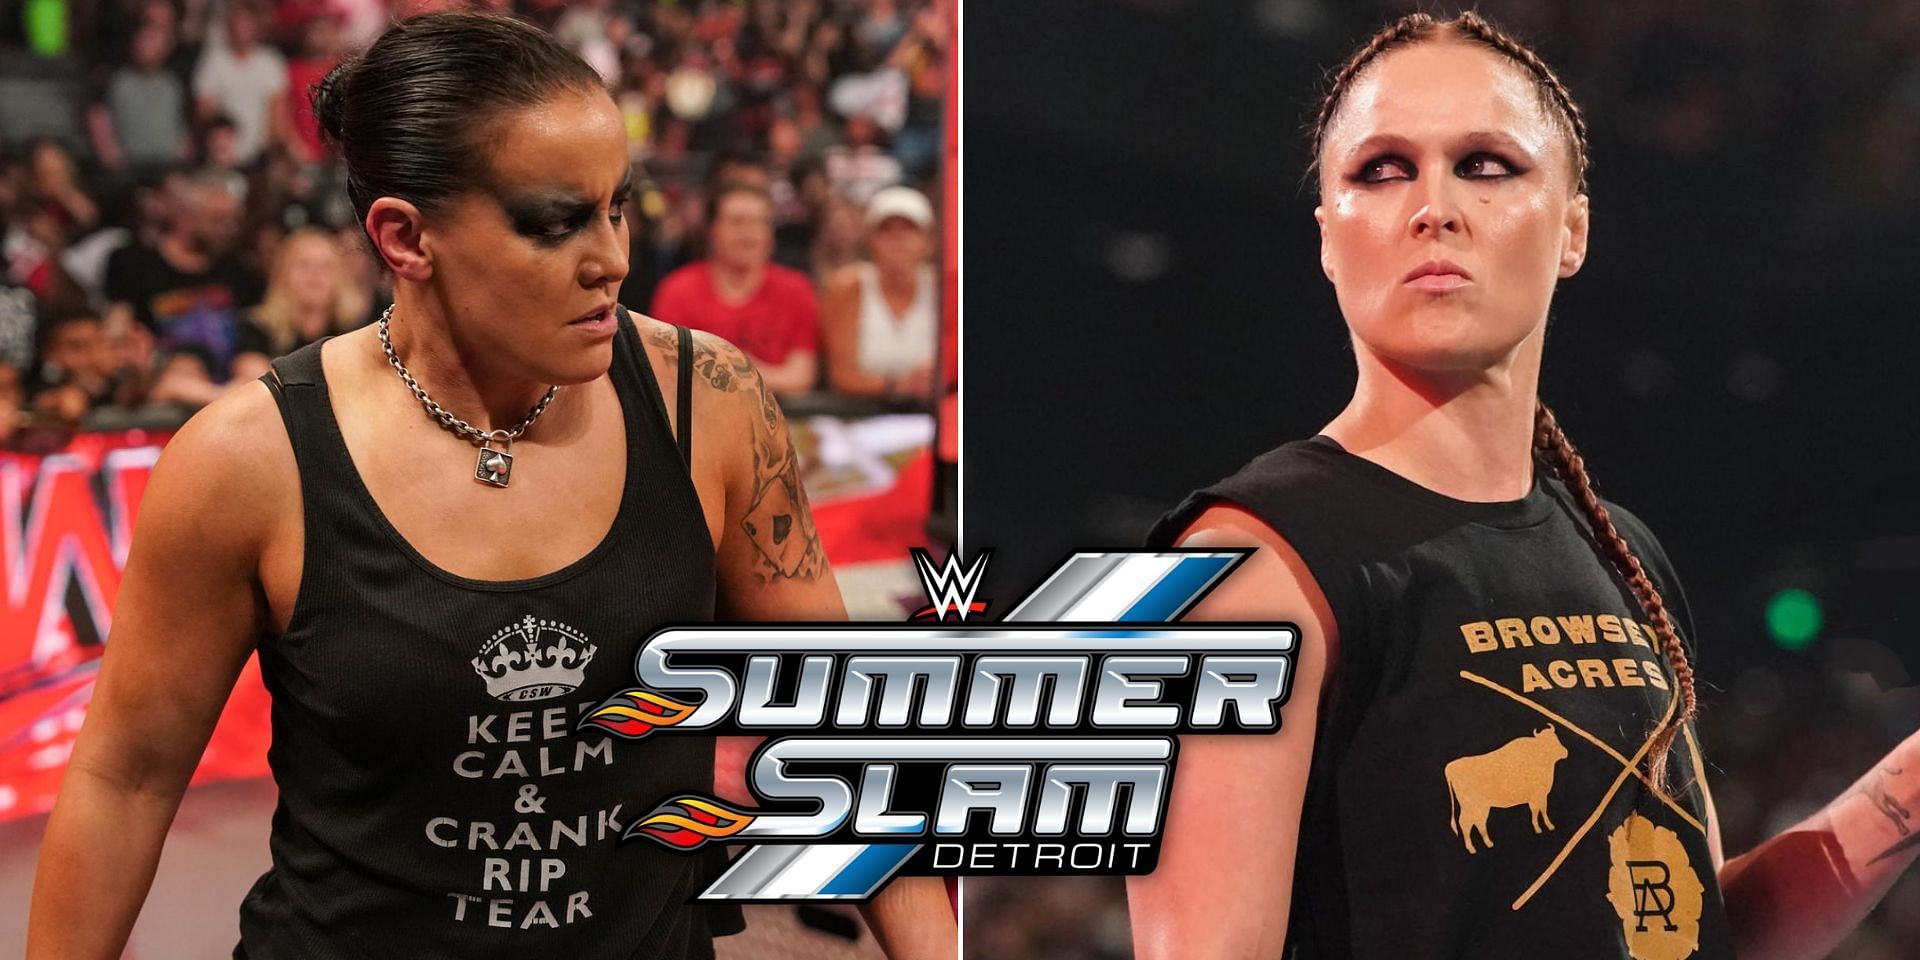 The stipulation for Shayna Baszler vs. Ronda Rousey has been announced 